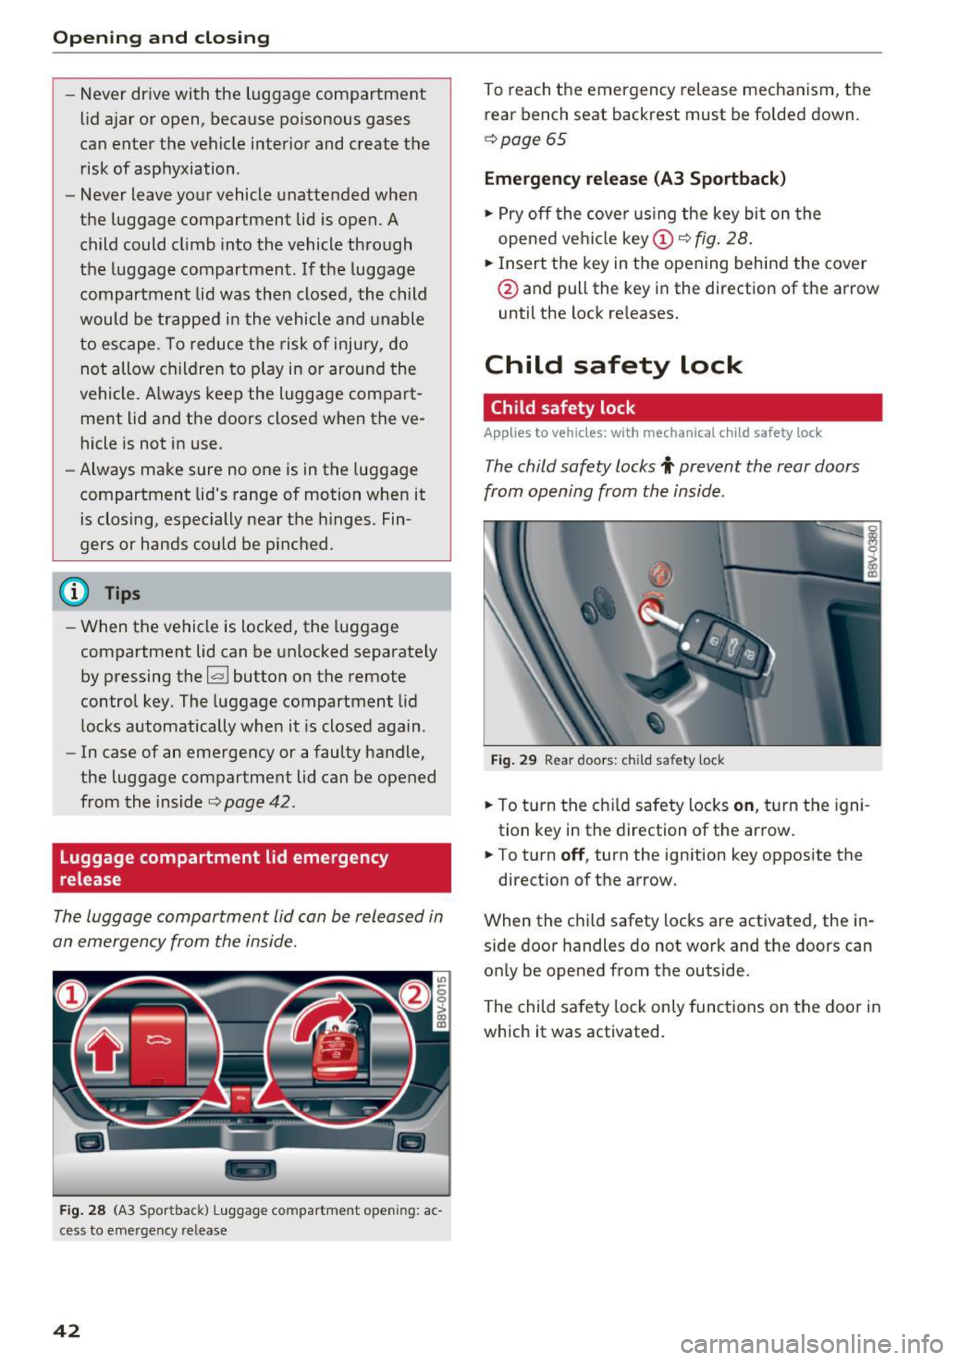 AUDI S3 2016 Service Manual Opening  and clo sin g 
- Never  drive  with  the  luggage  compartment 
lid ajar  or open,  because  poisonous  gases 
can  enter  the  vehicle  interior  and  create  the 
risk of  asphyxiation . 
-